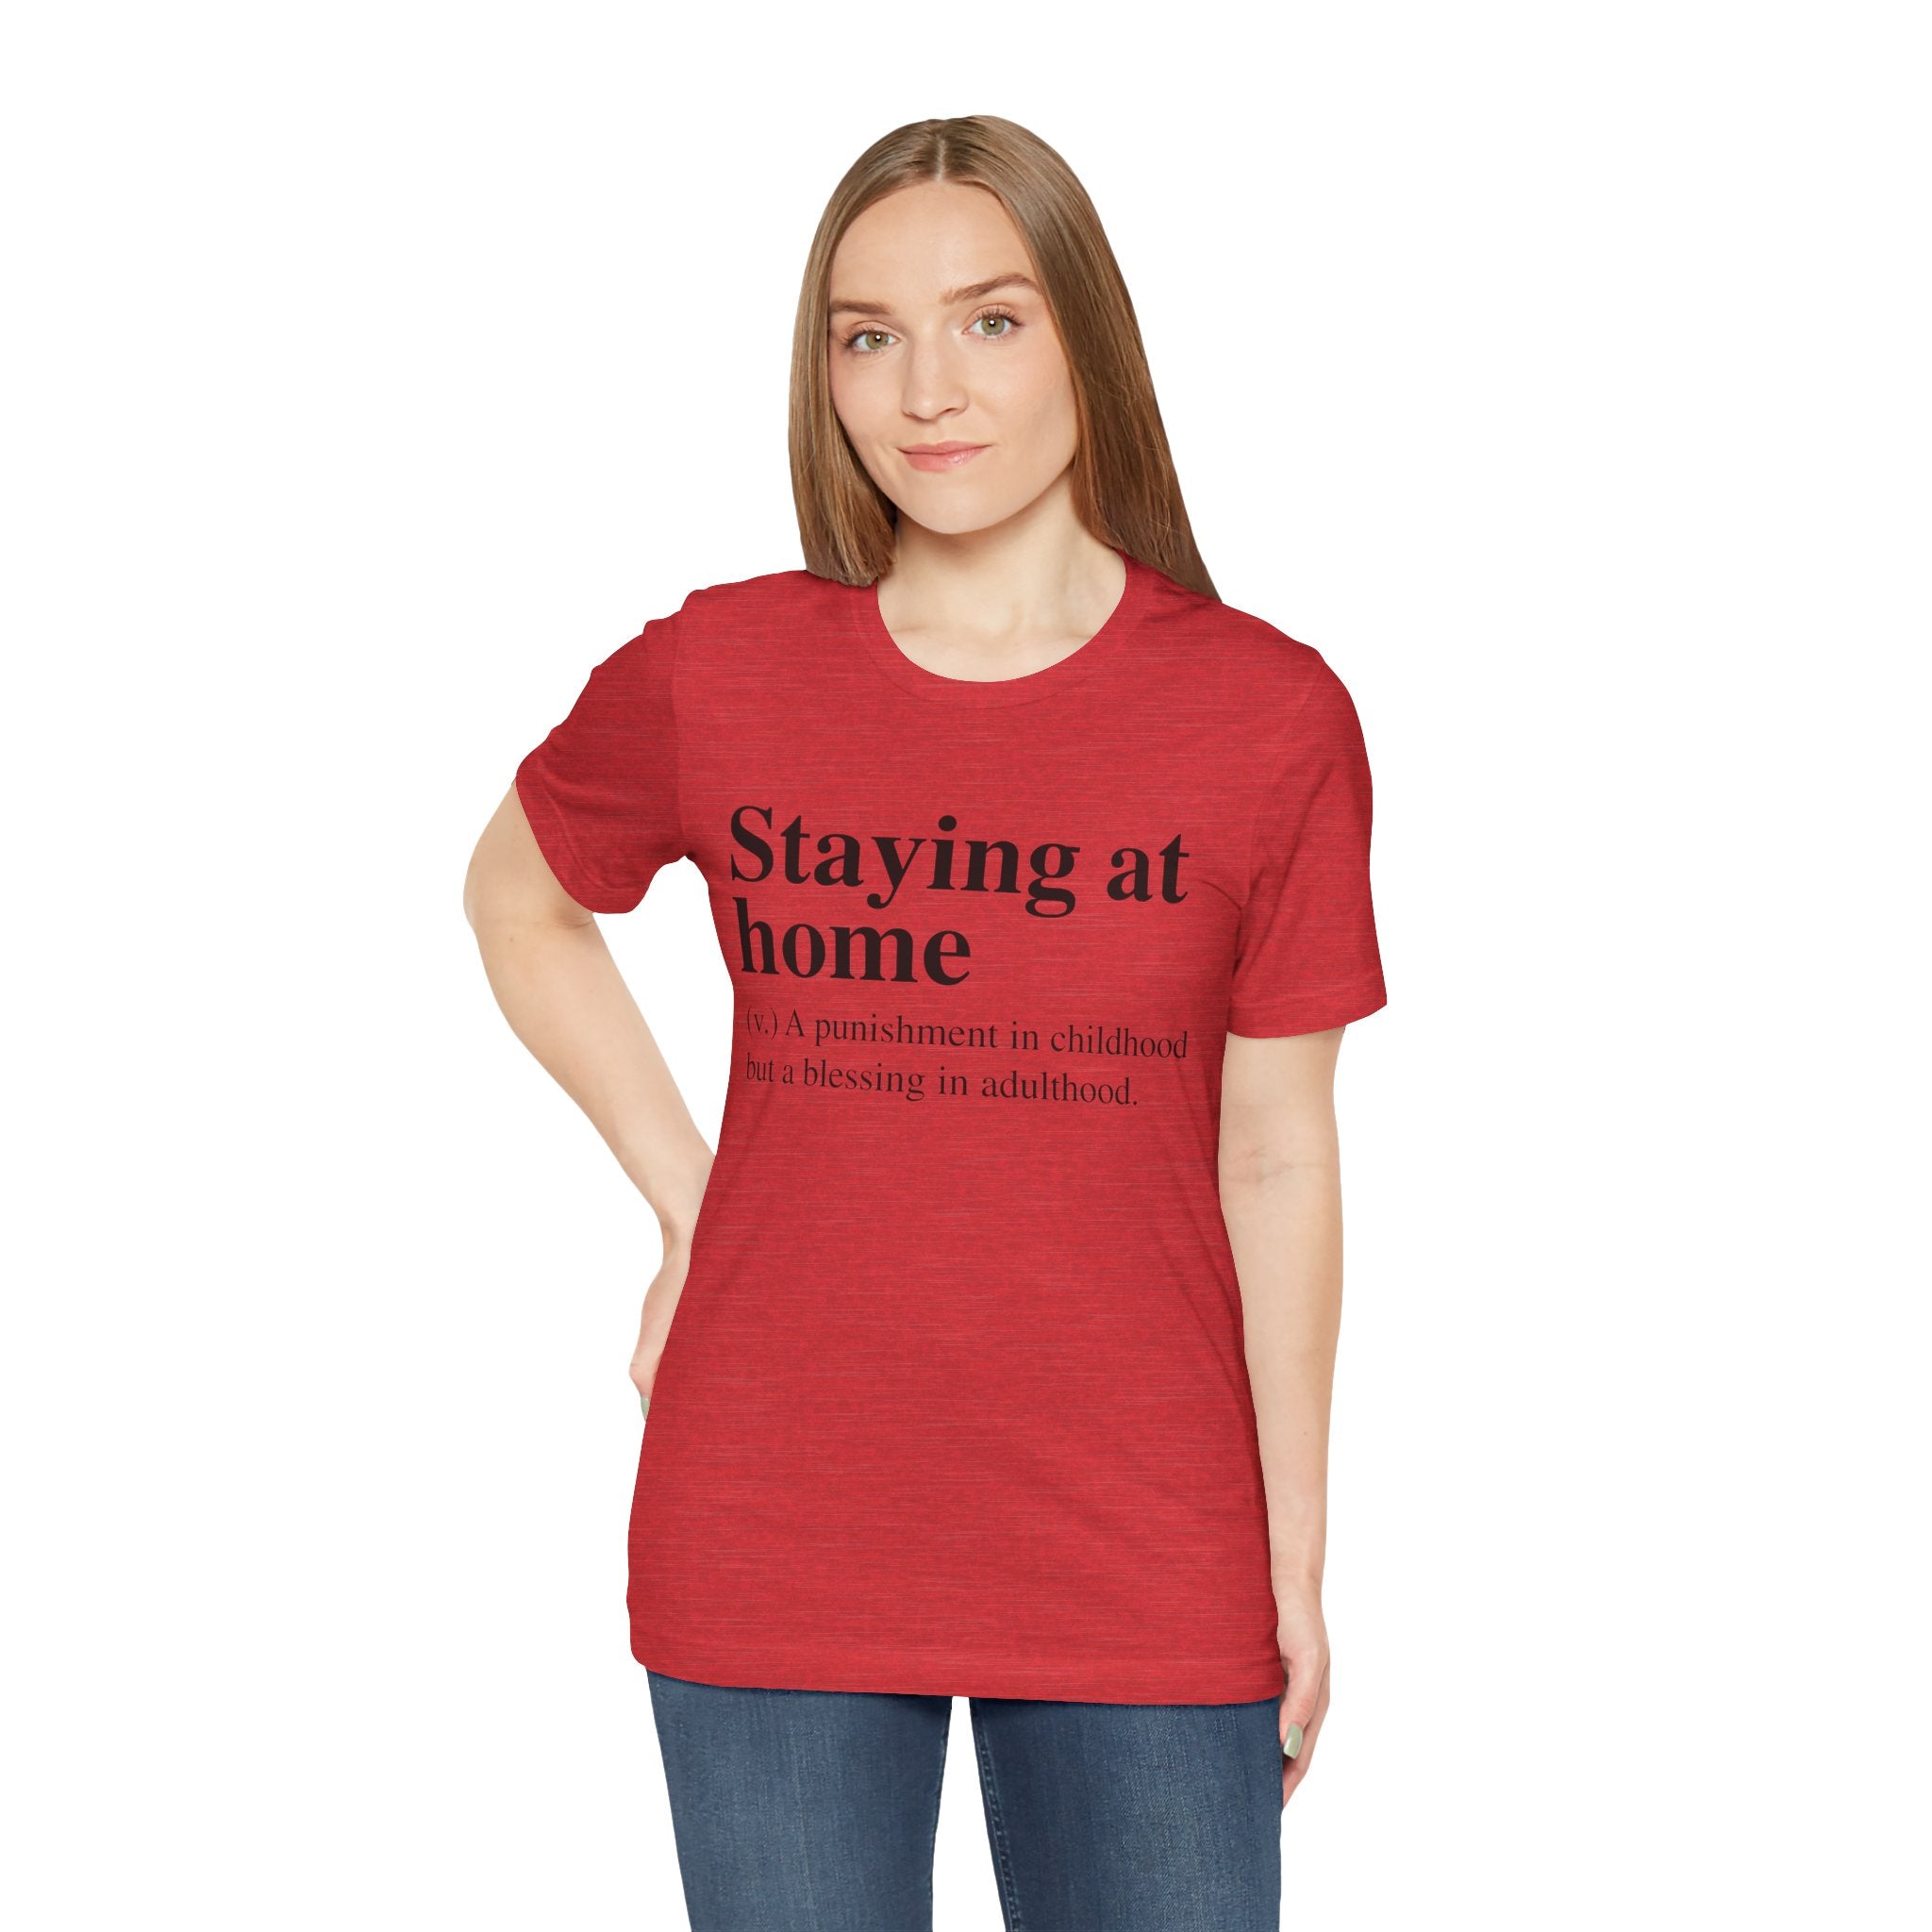 Woman wearing a comfortable fit red Staying at Home T-Shirt with the text "staying at home: a punishment in childhood but a blessing in adulthood" printed on it.